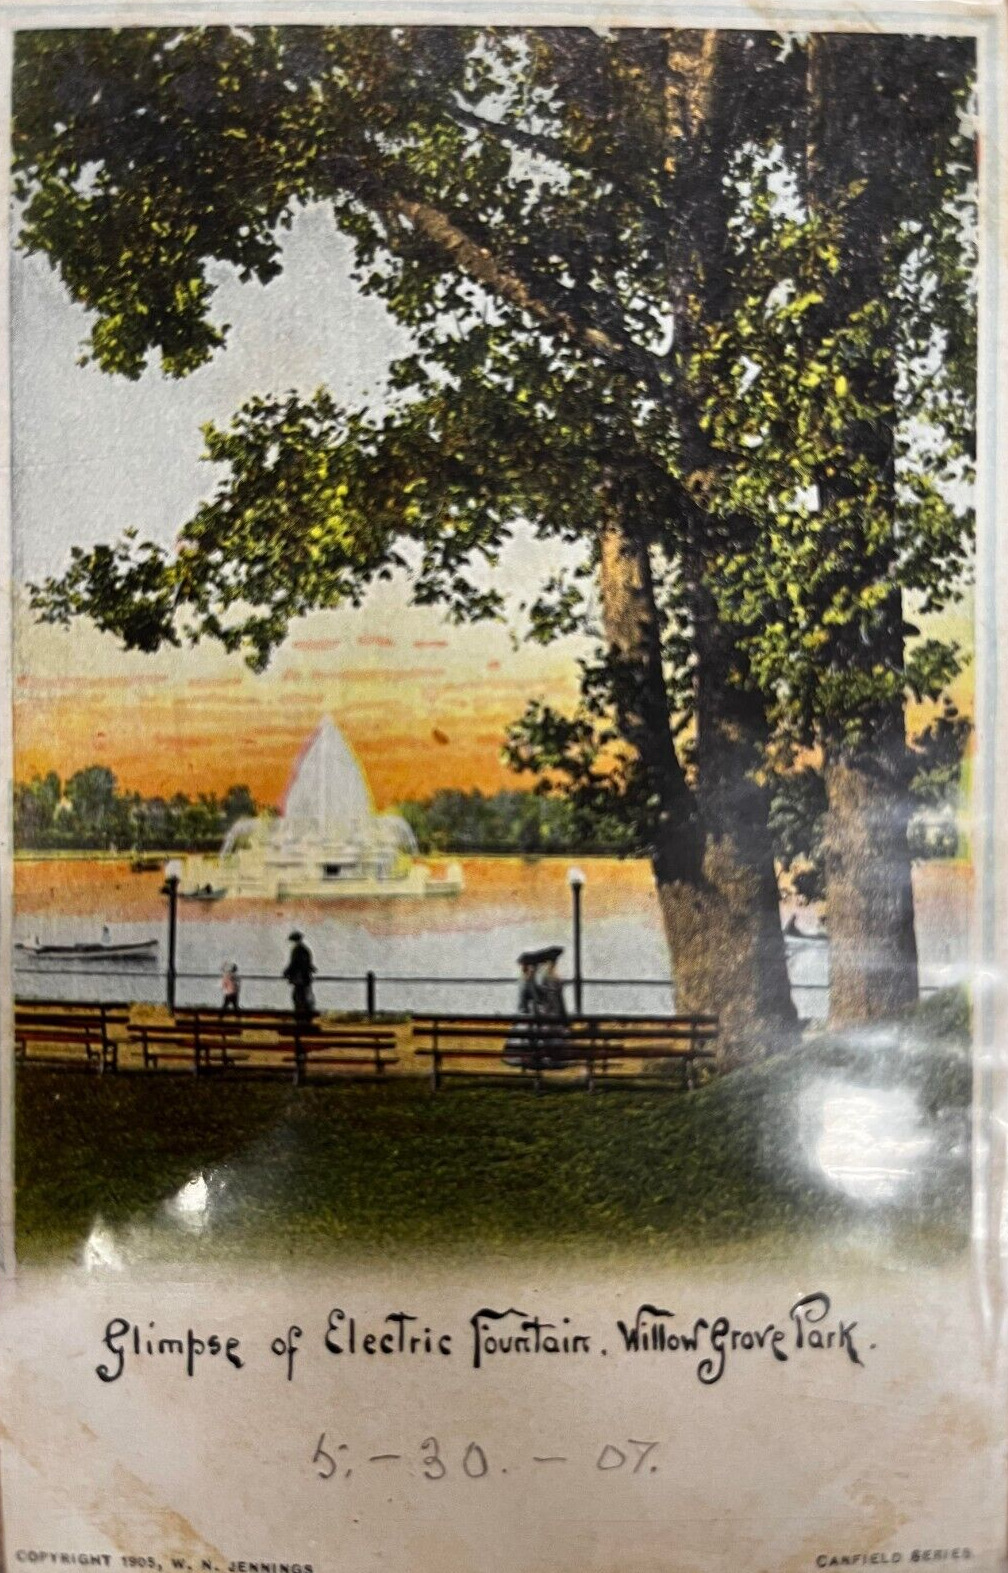 1906 WILLOW GROVE PARK GLIMPSE OF ELECTRIC FOUNTAIN ANTIQUE POSTCARD